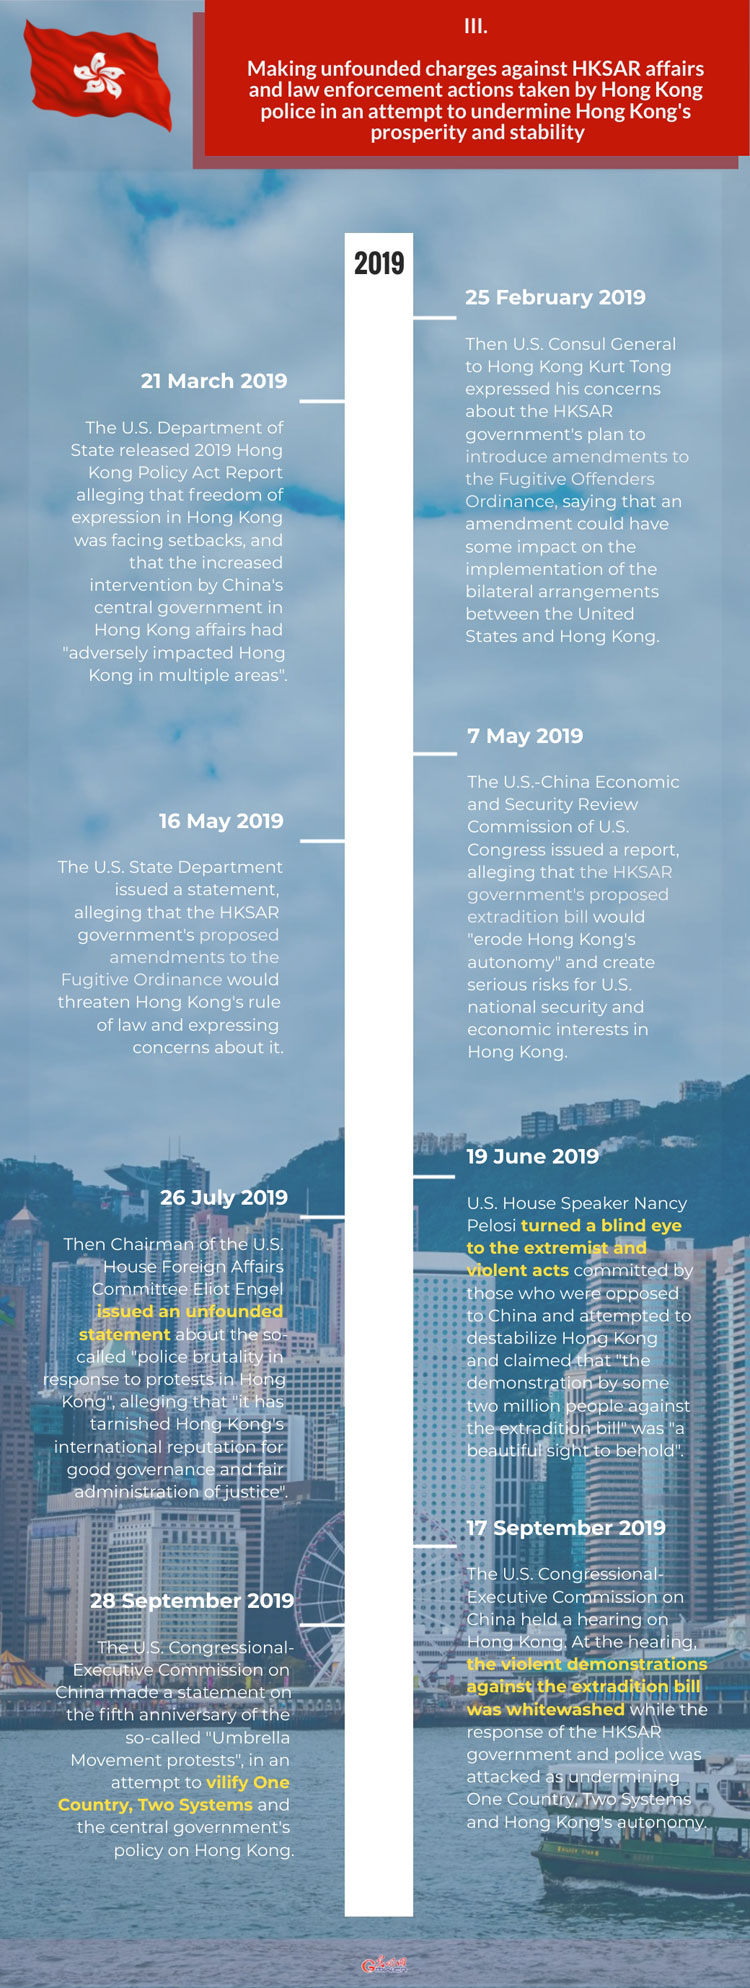 U.S. Interference in Hong Kong Affairs and Support for Anti-China, Destabilizing Forces: making unfounded charges against HKSAR affairs to undermine Hong Kong's prosperity and stability